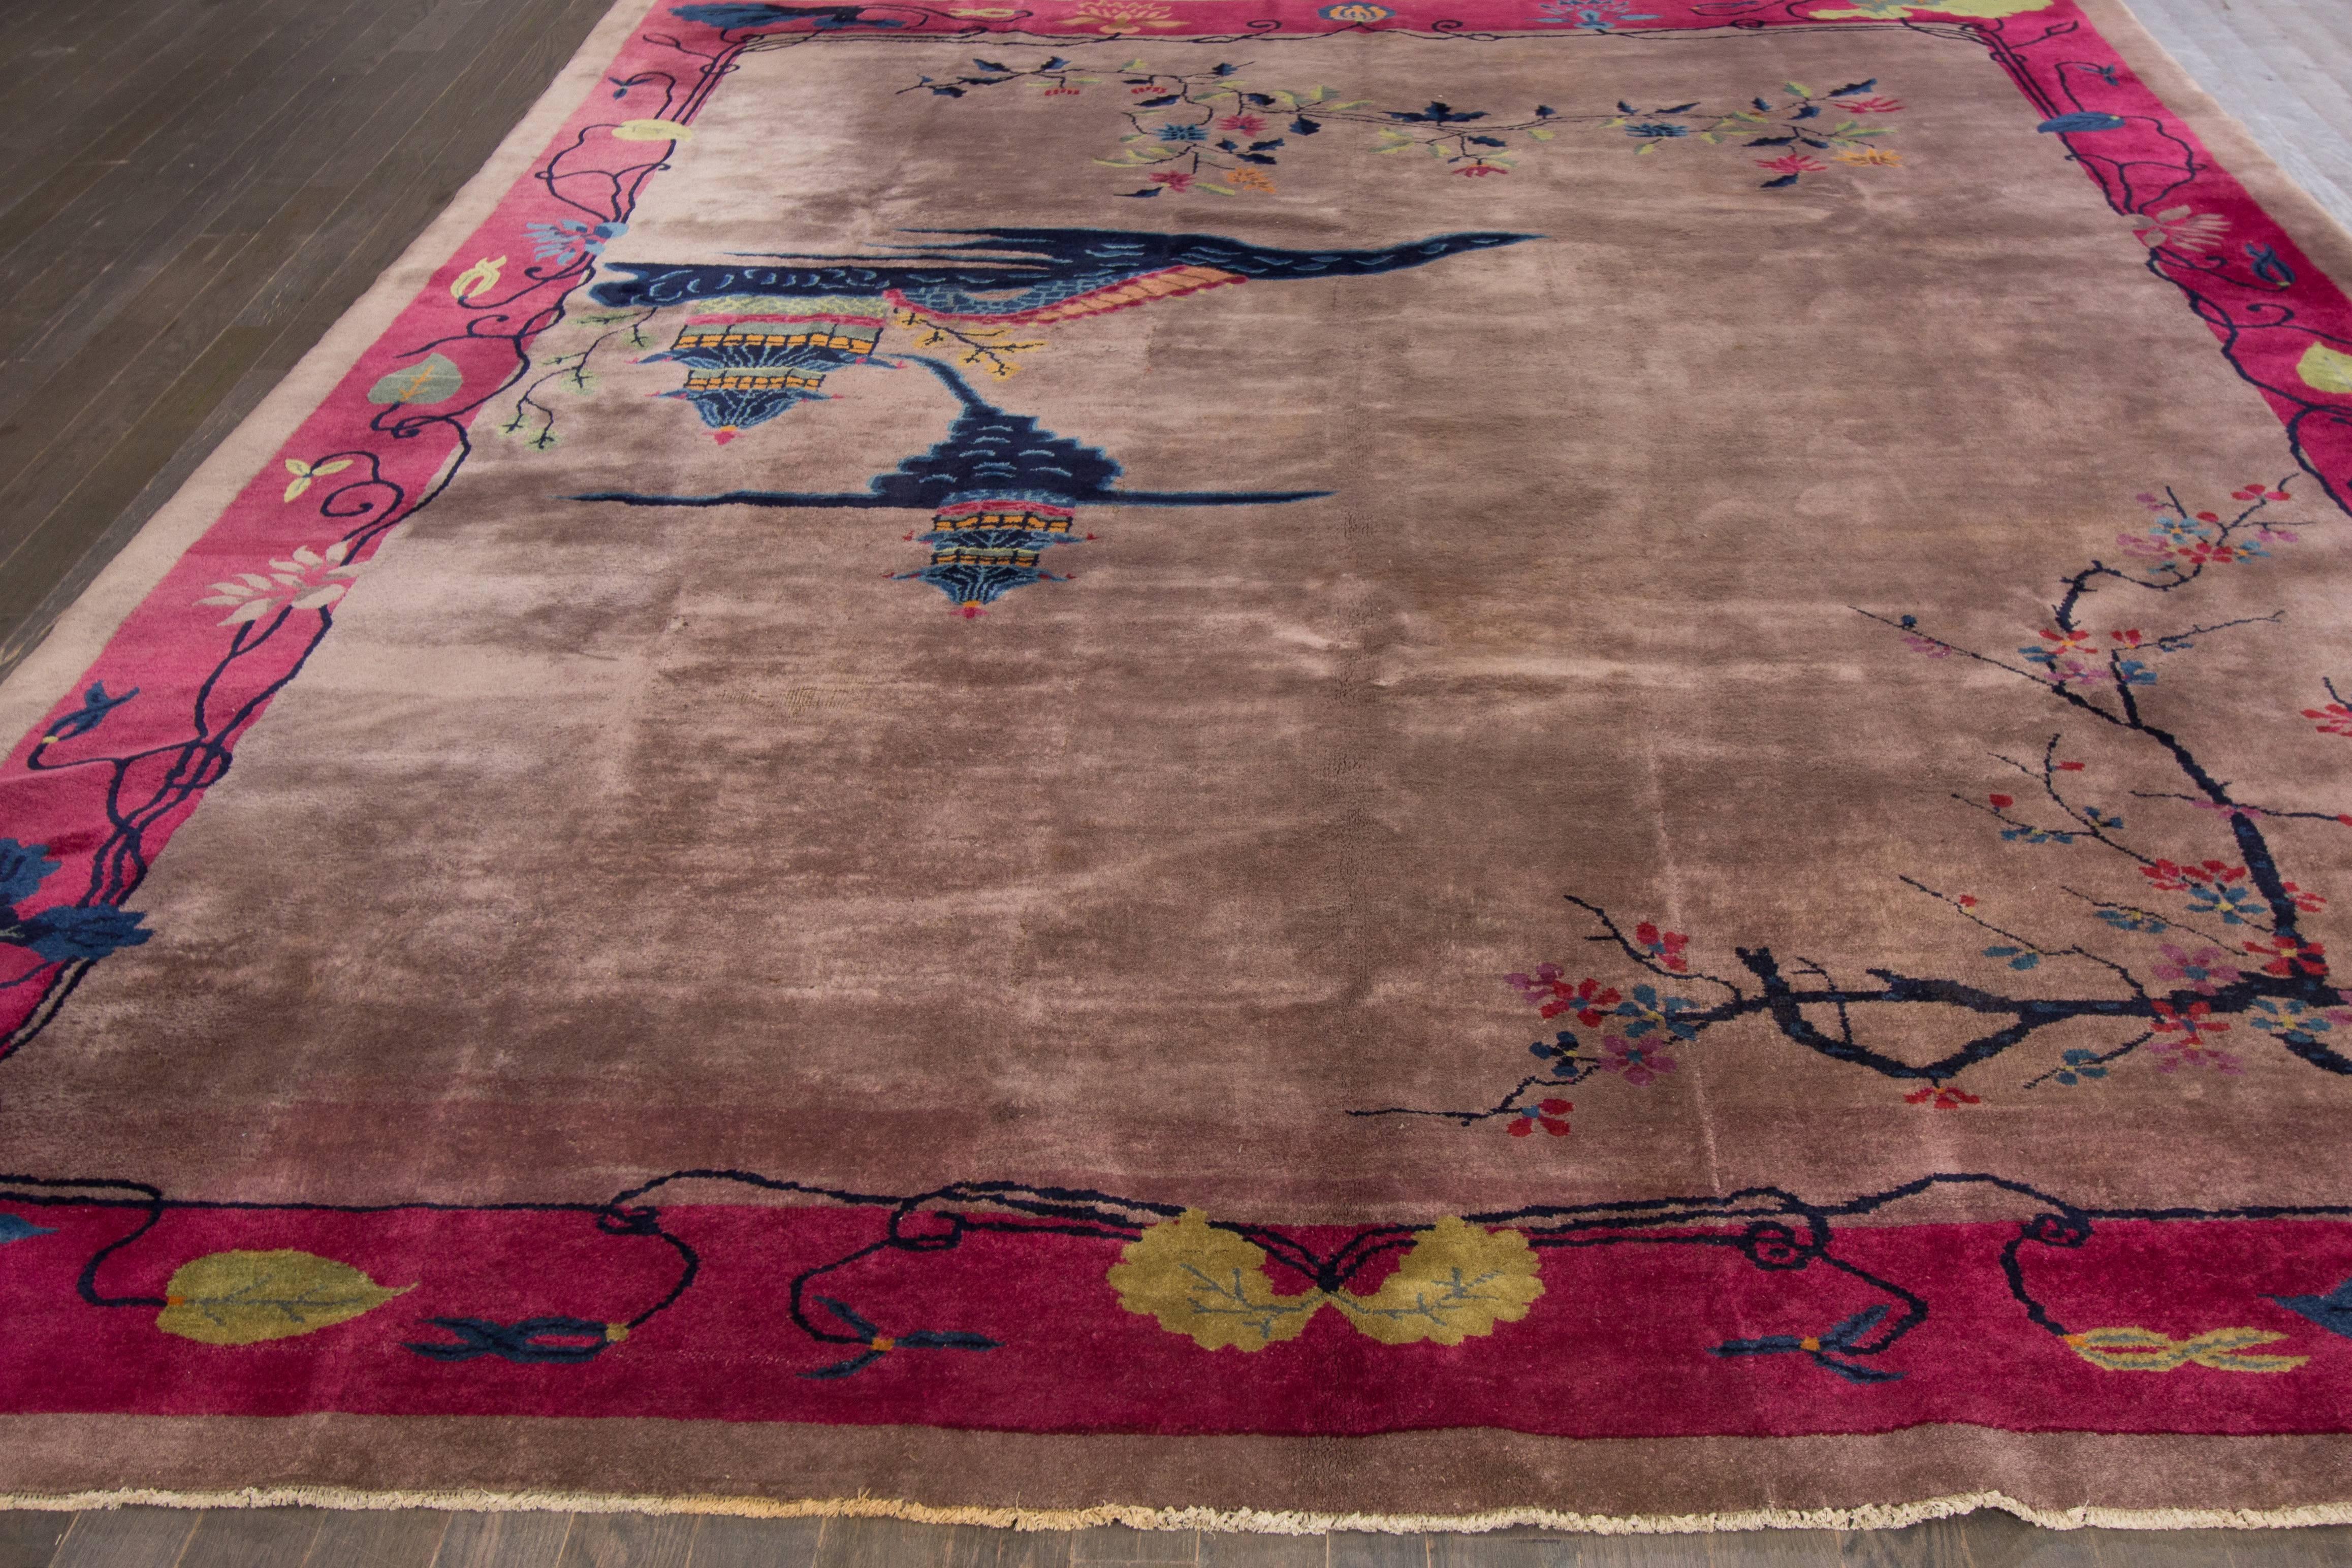 Vintage 1920s Chinese Art Deco rug with a wide purple border and rose field with a traditional, multi-colored design. Measures 9x11.06.